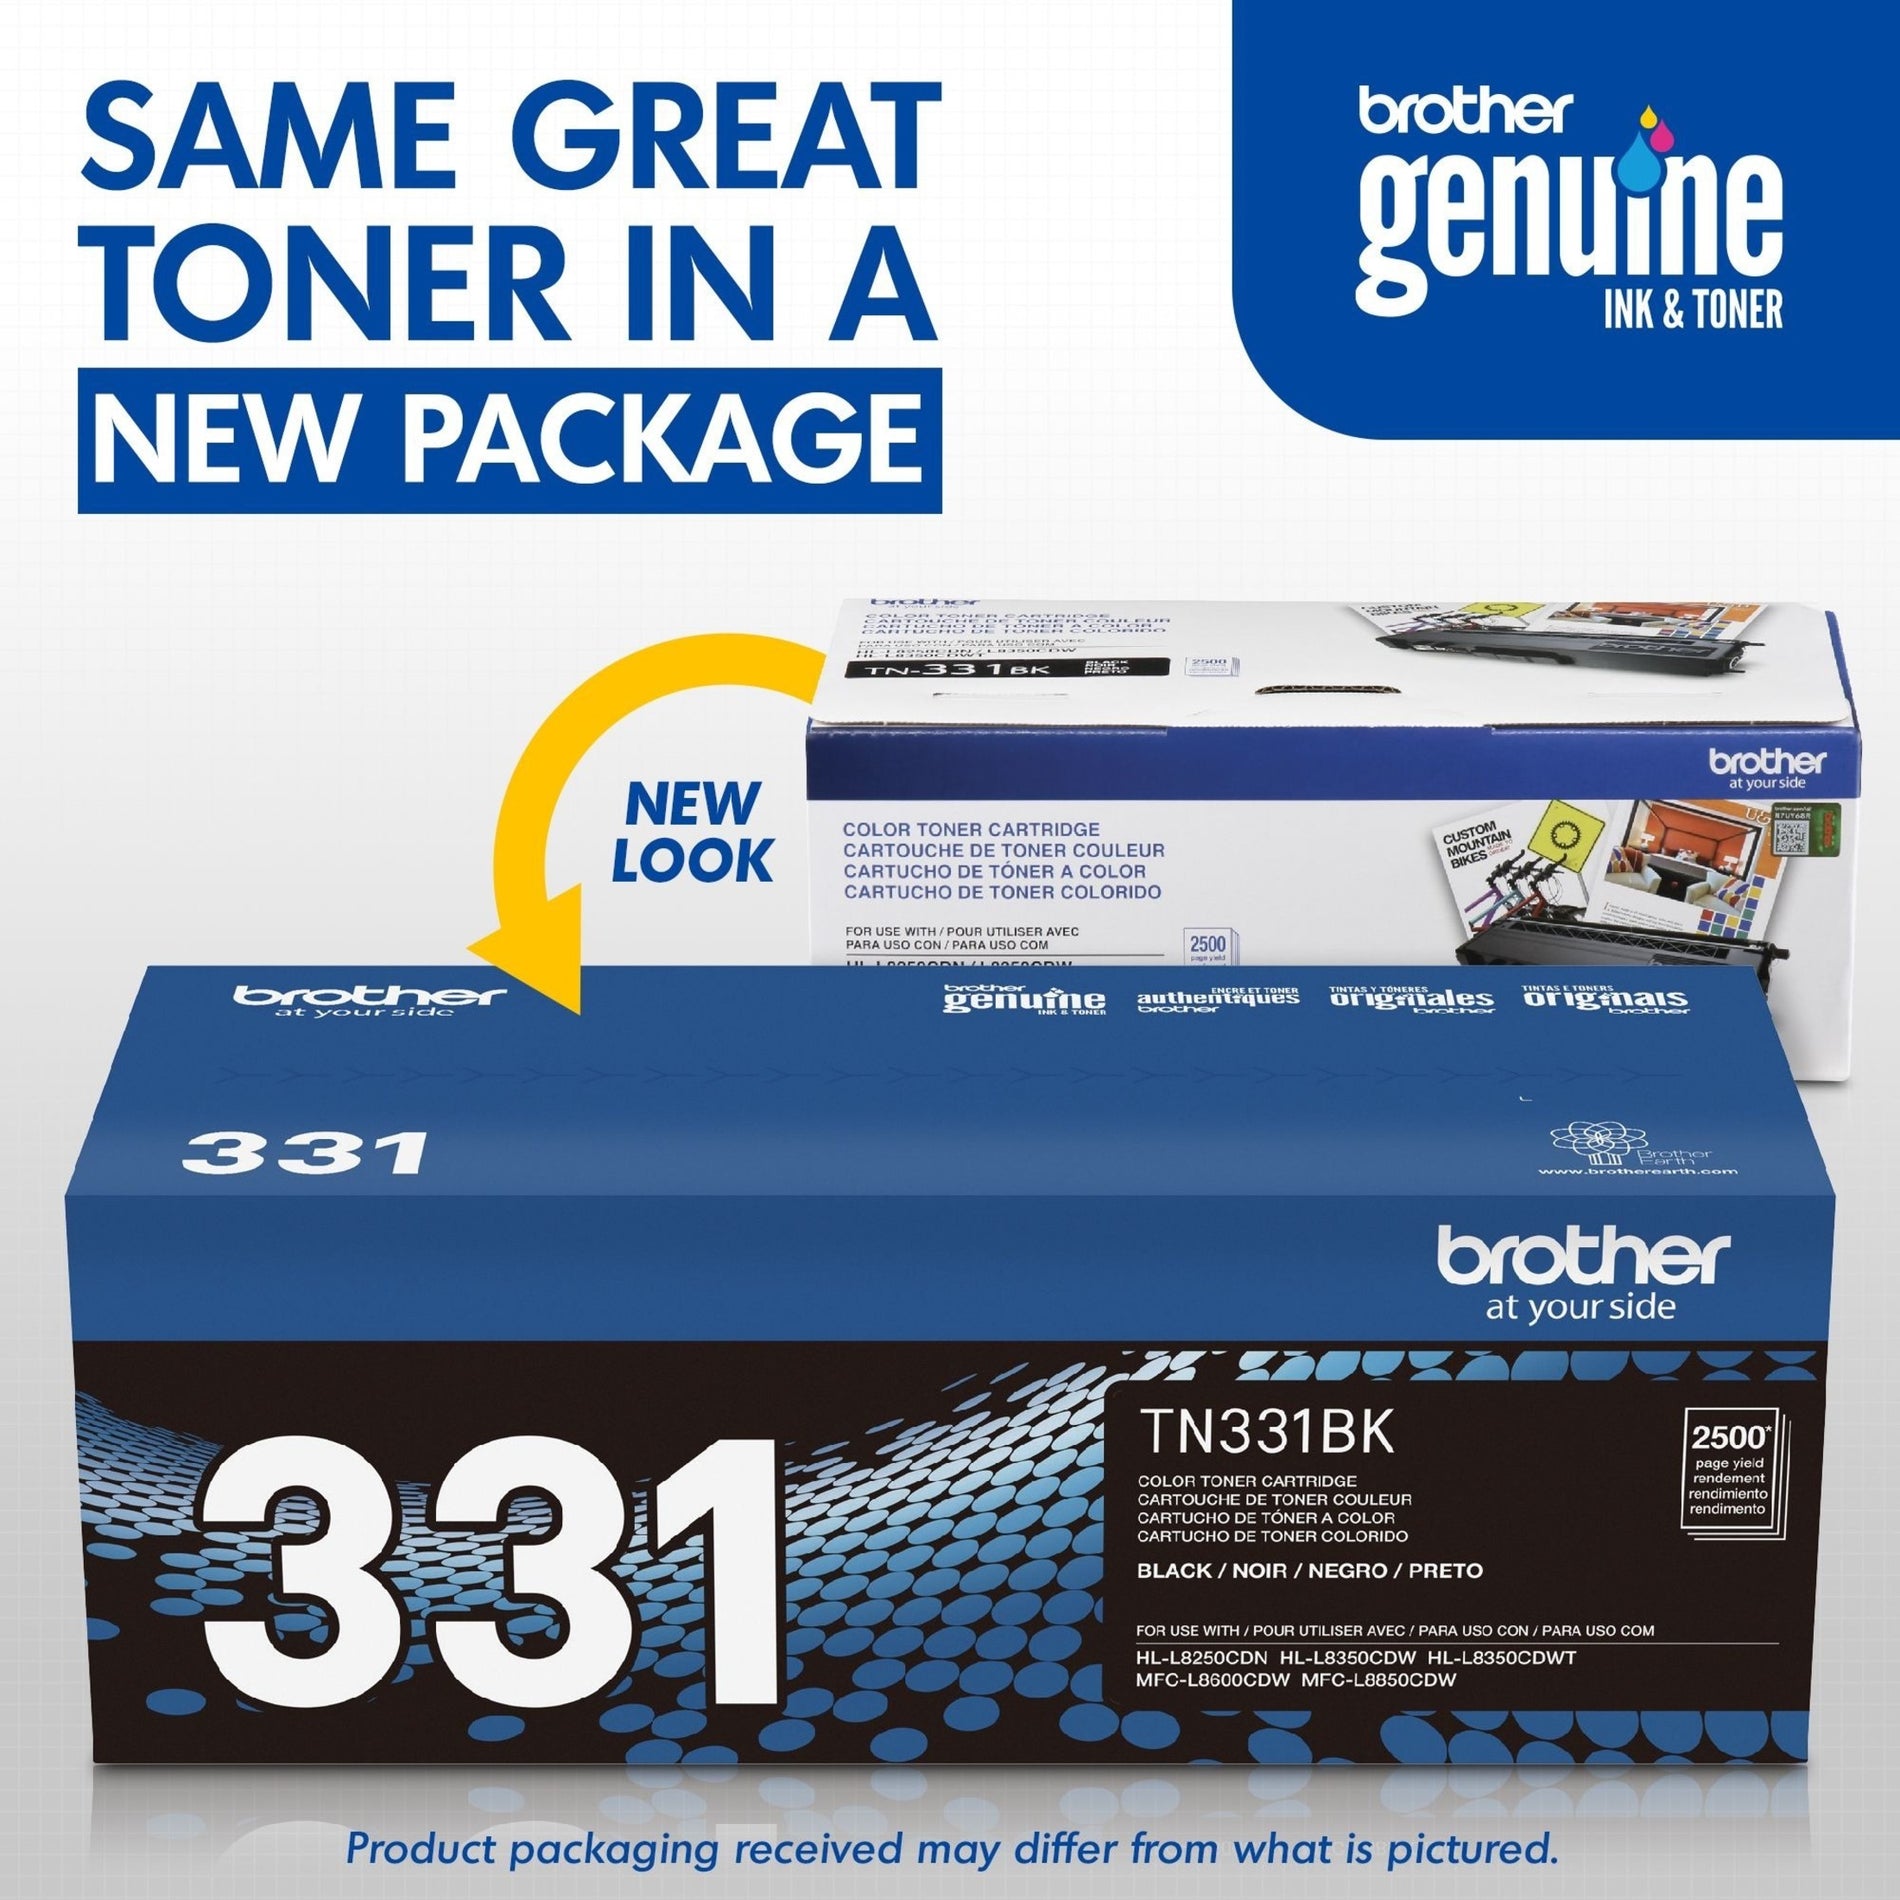 Brother TN331BK Toner Cartridge, 2500 Pages Yield, Black